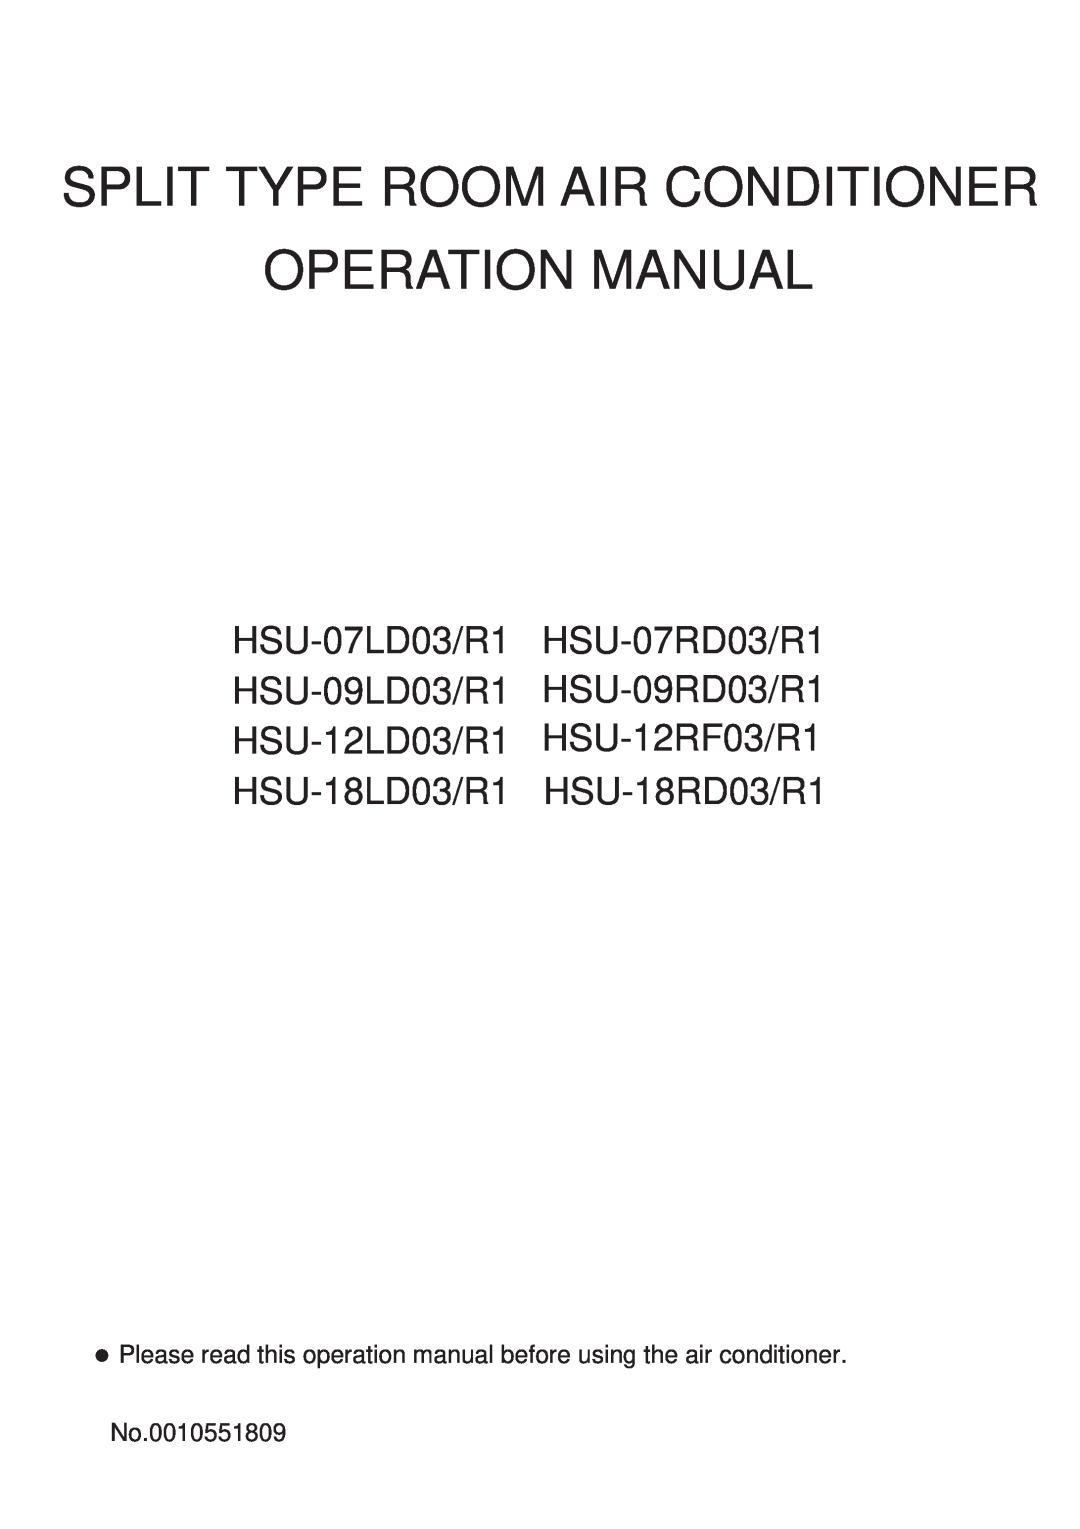 Haier No. 0010551809 operation manual Split Type Room Air Conditioner, No.0010551809 